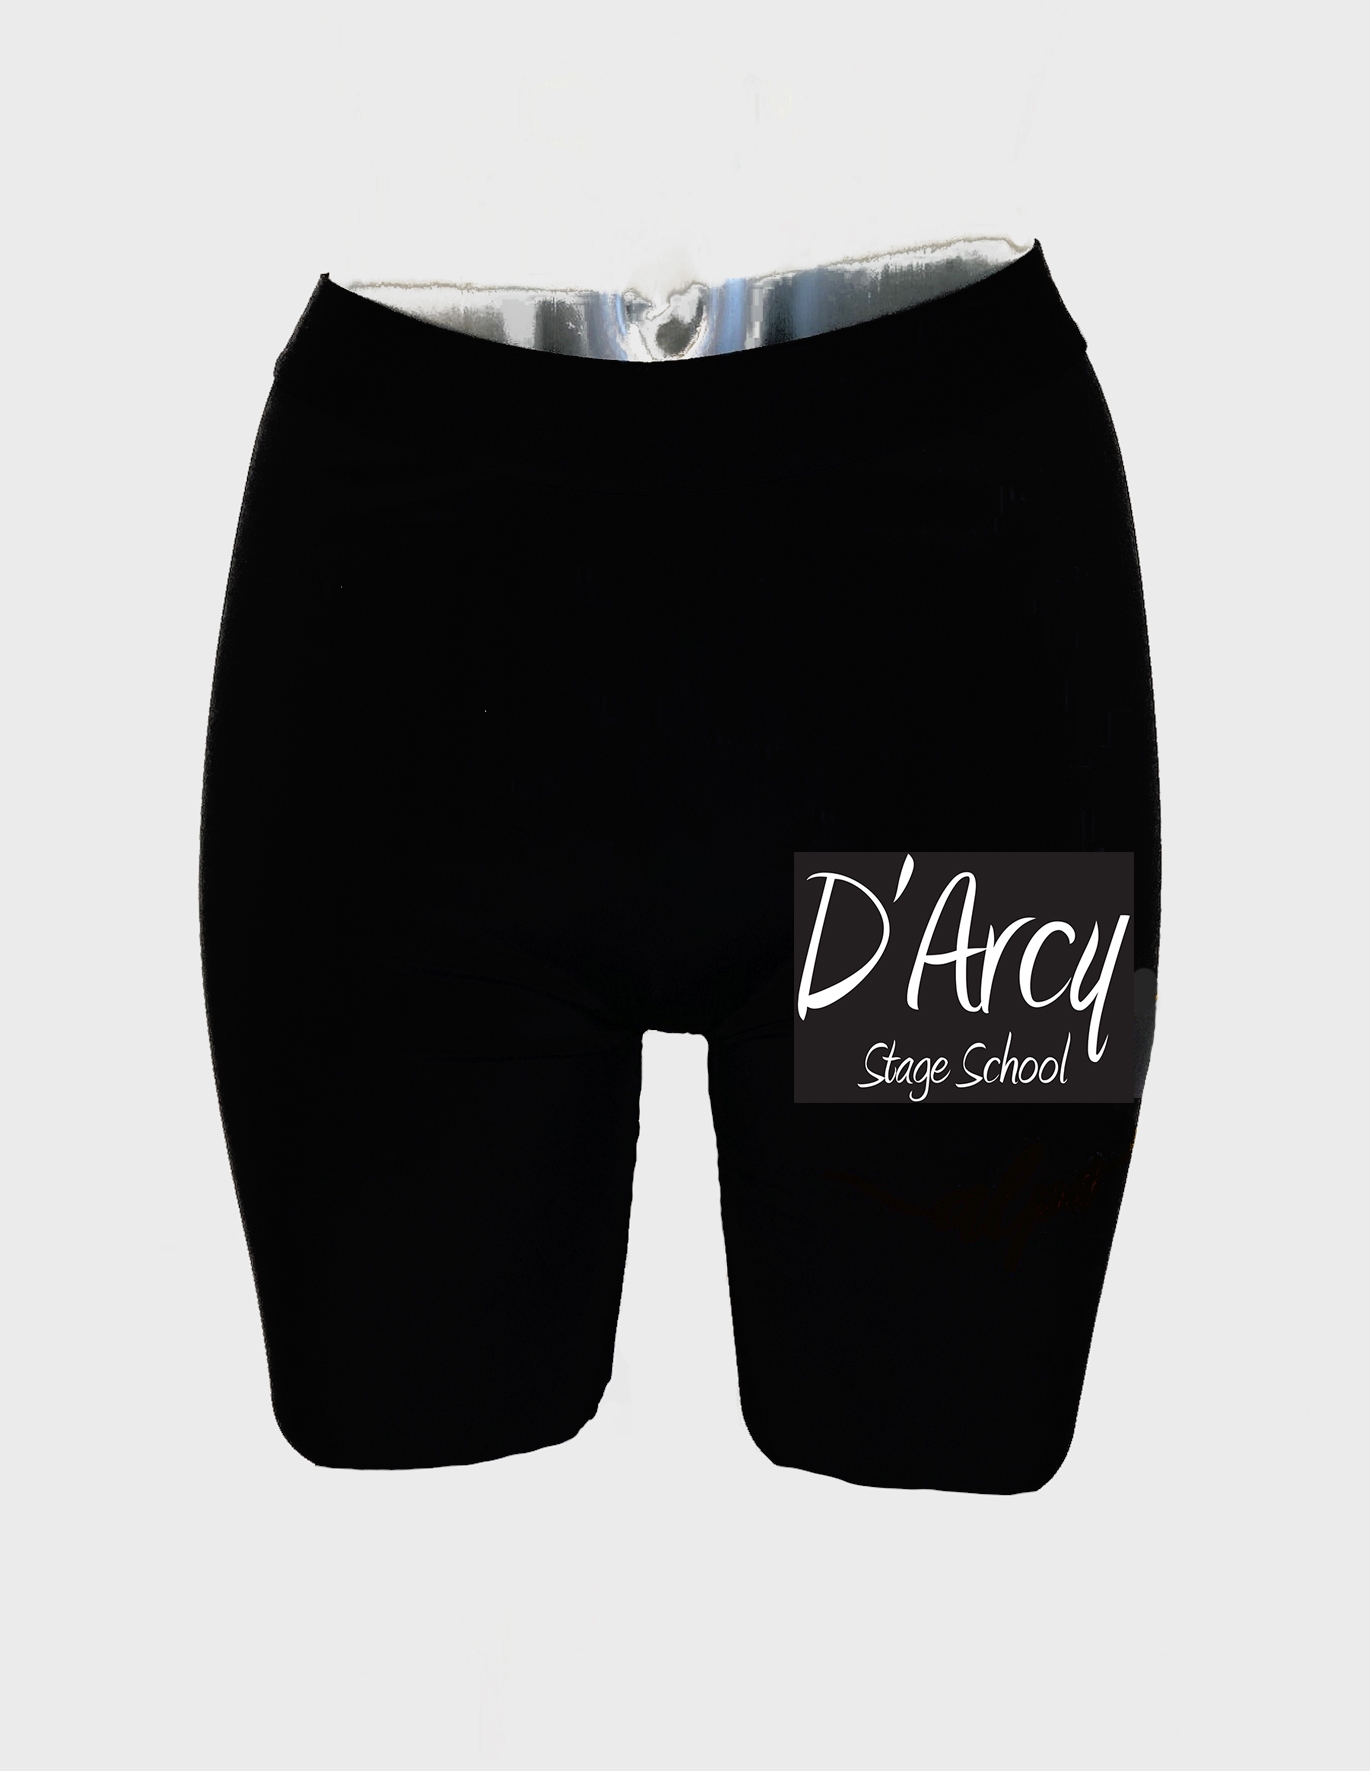 d'arcy stage school fashion cycling shorts